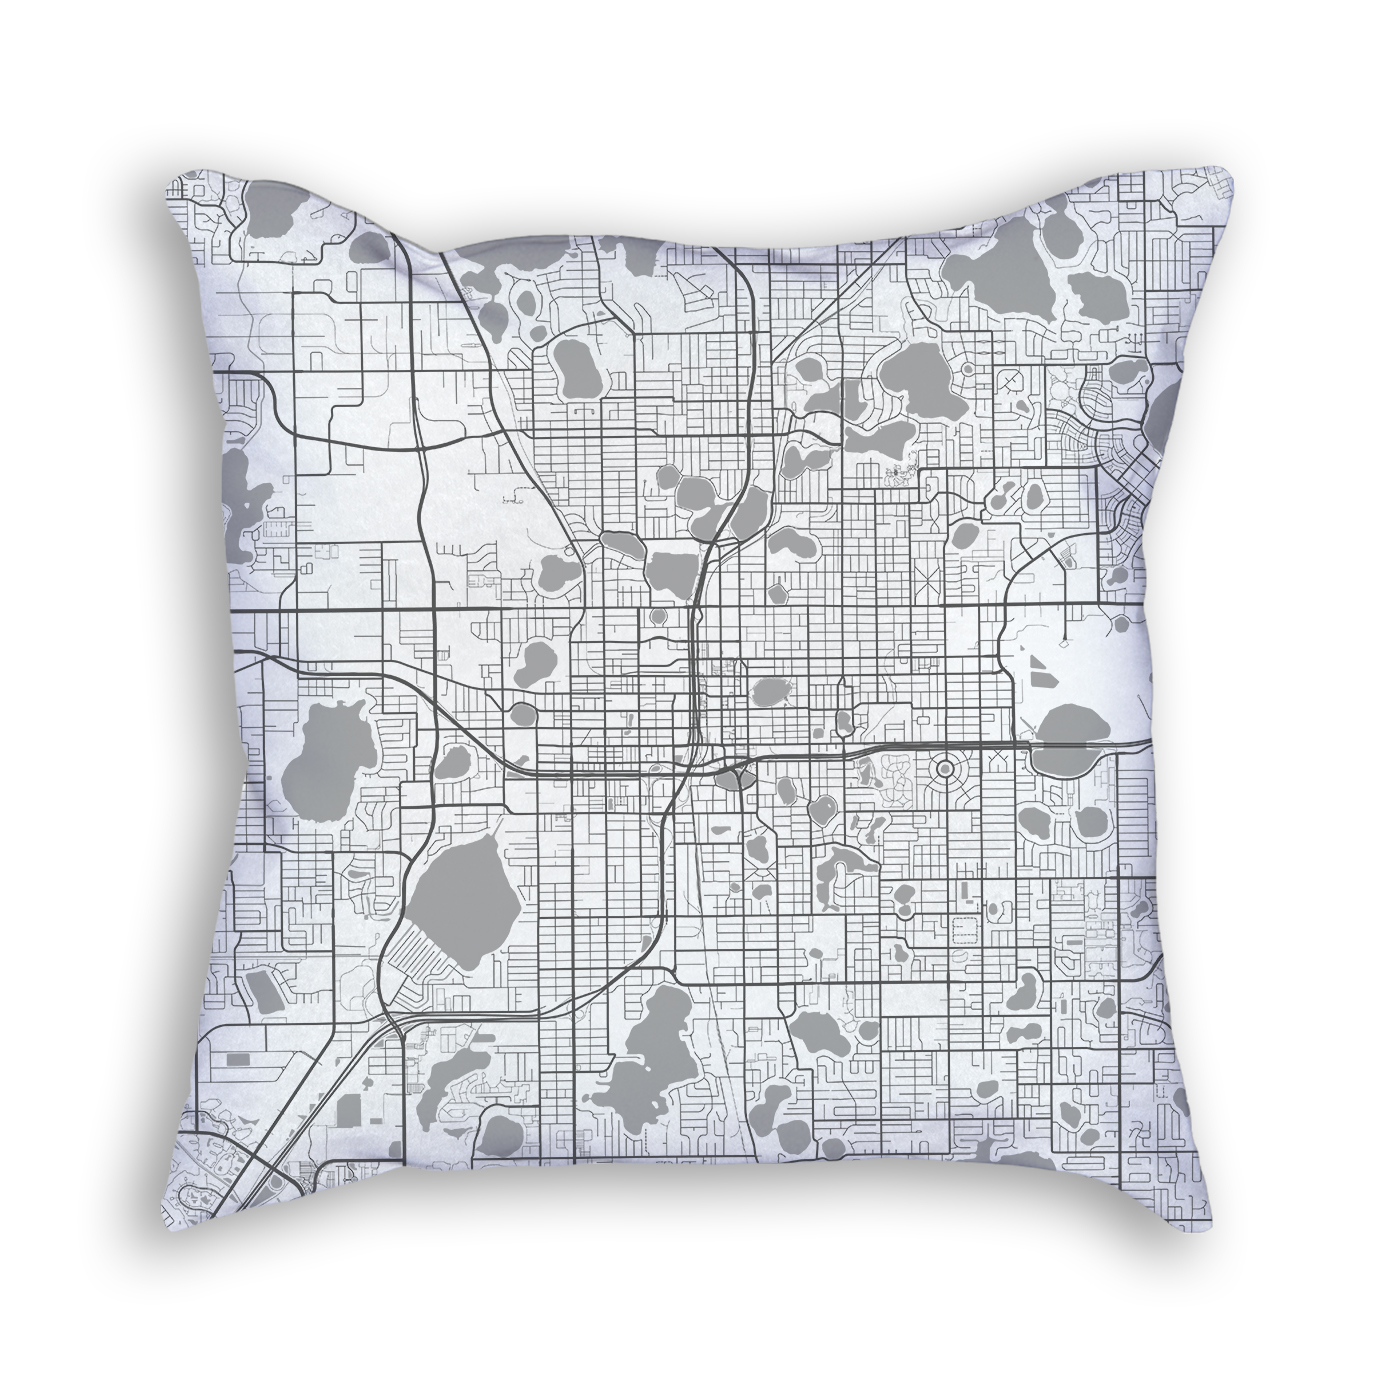 Multicolor 18x18 Florida Is Calling USA Traveler Apparel Calling and I Must Go Florida Map Throw Pillow 